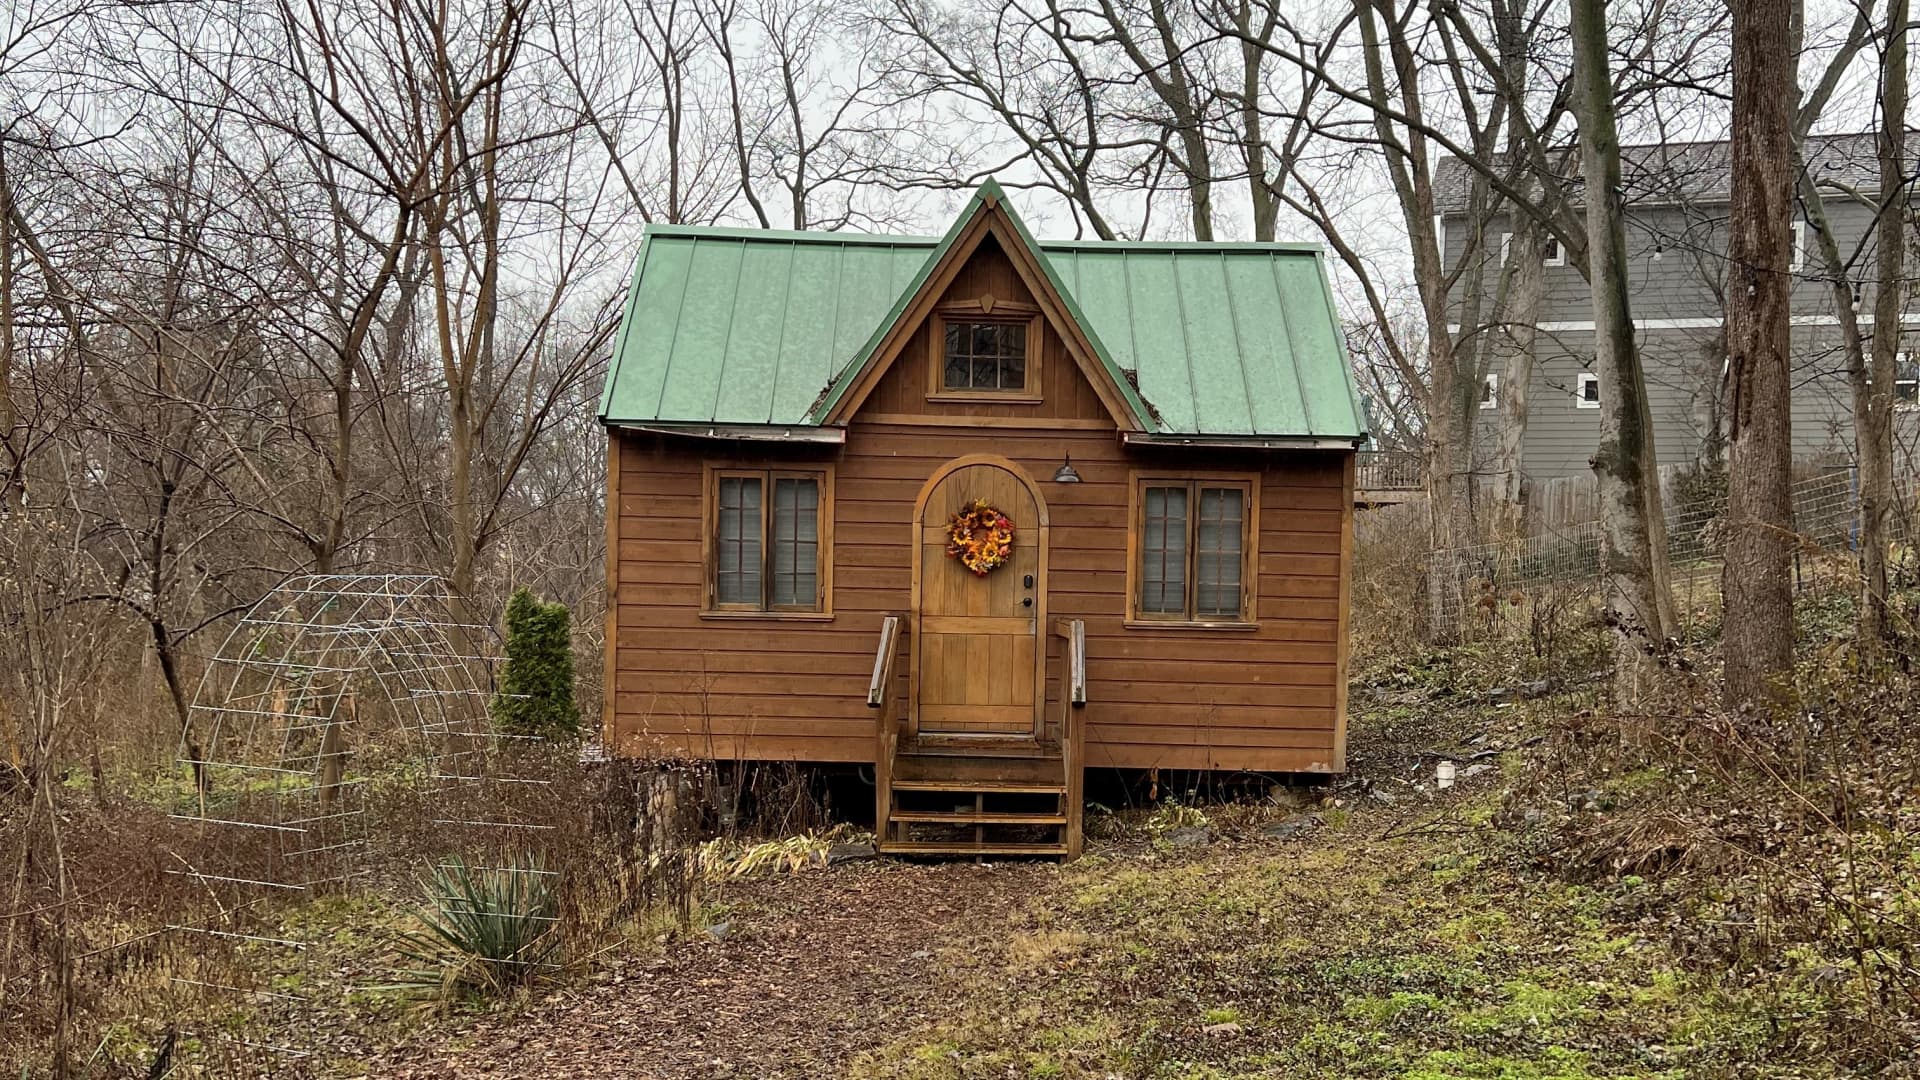 The Nashville Tiny Home was named the most popular Airbnb in Tennessee in 2019.